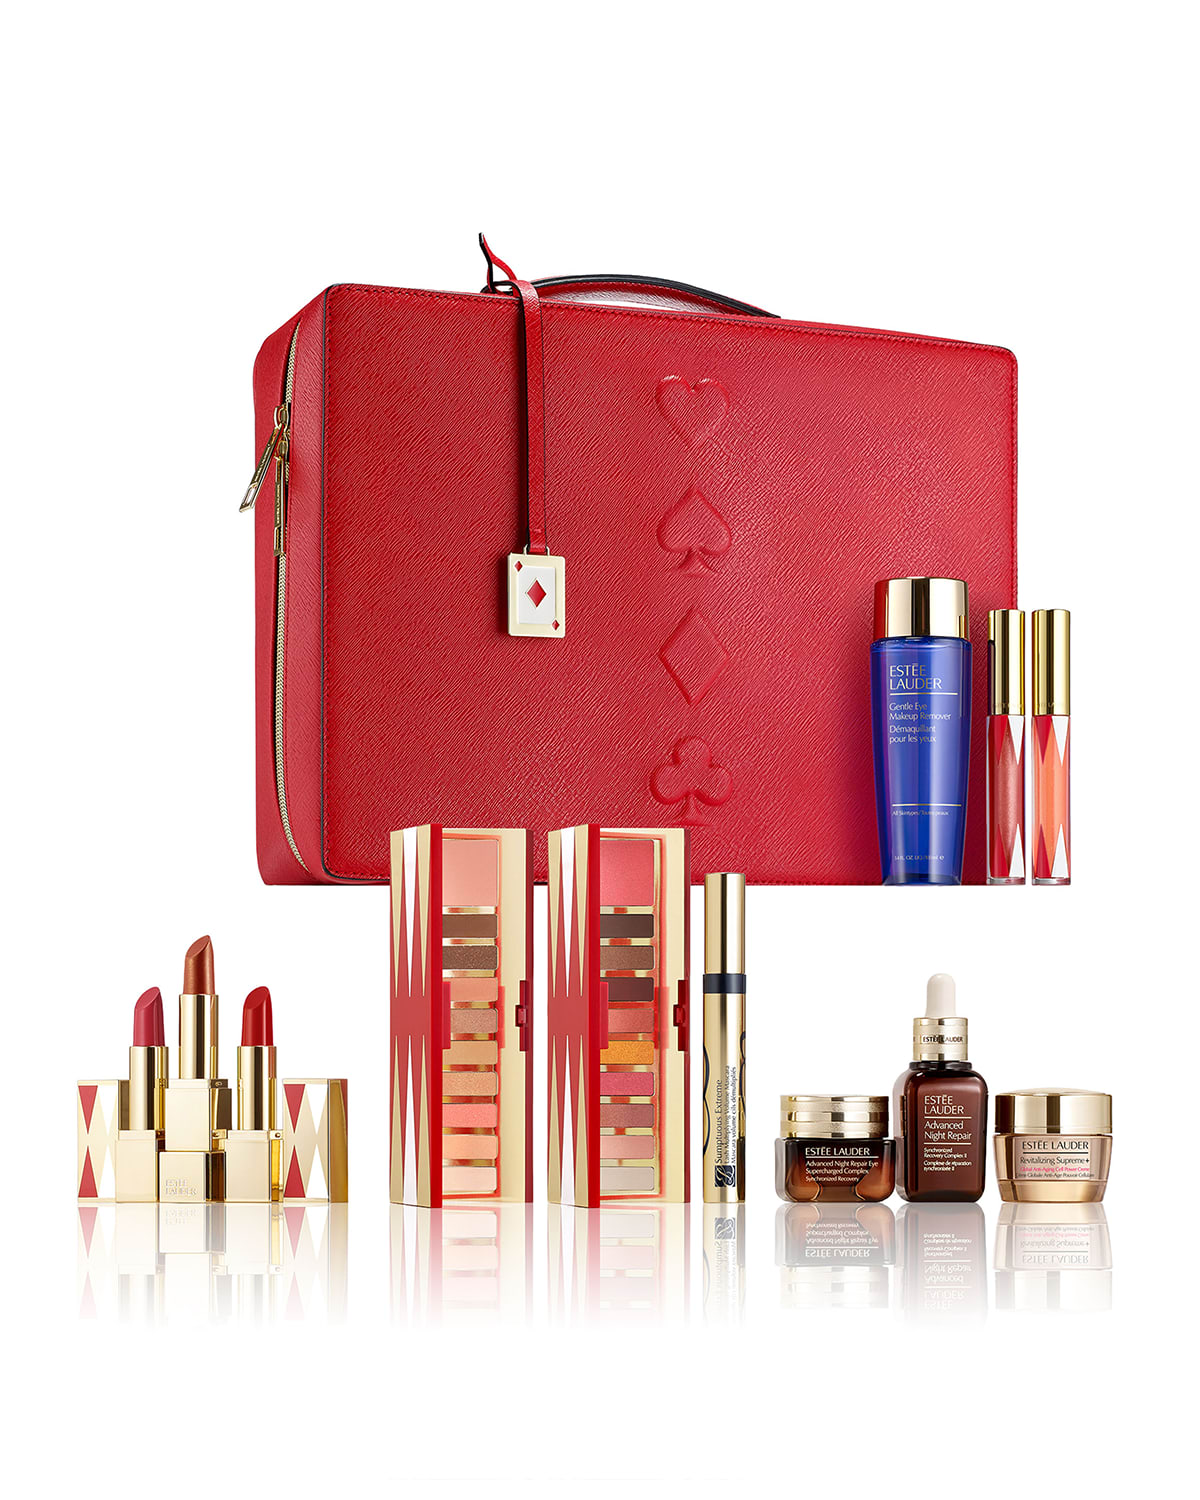 Estee Lauder Blockbuster for the Price of One with any $45 Estee Lauder Purchase